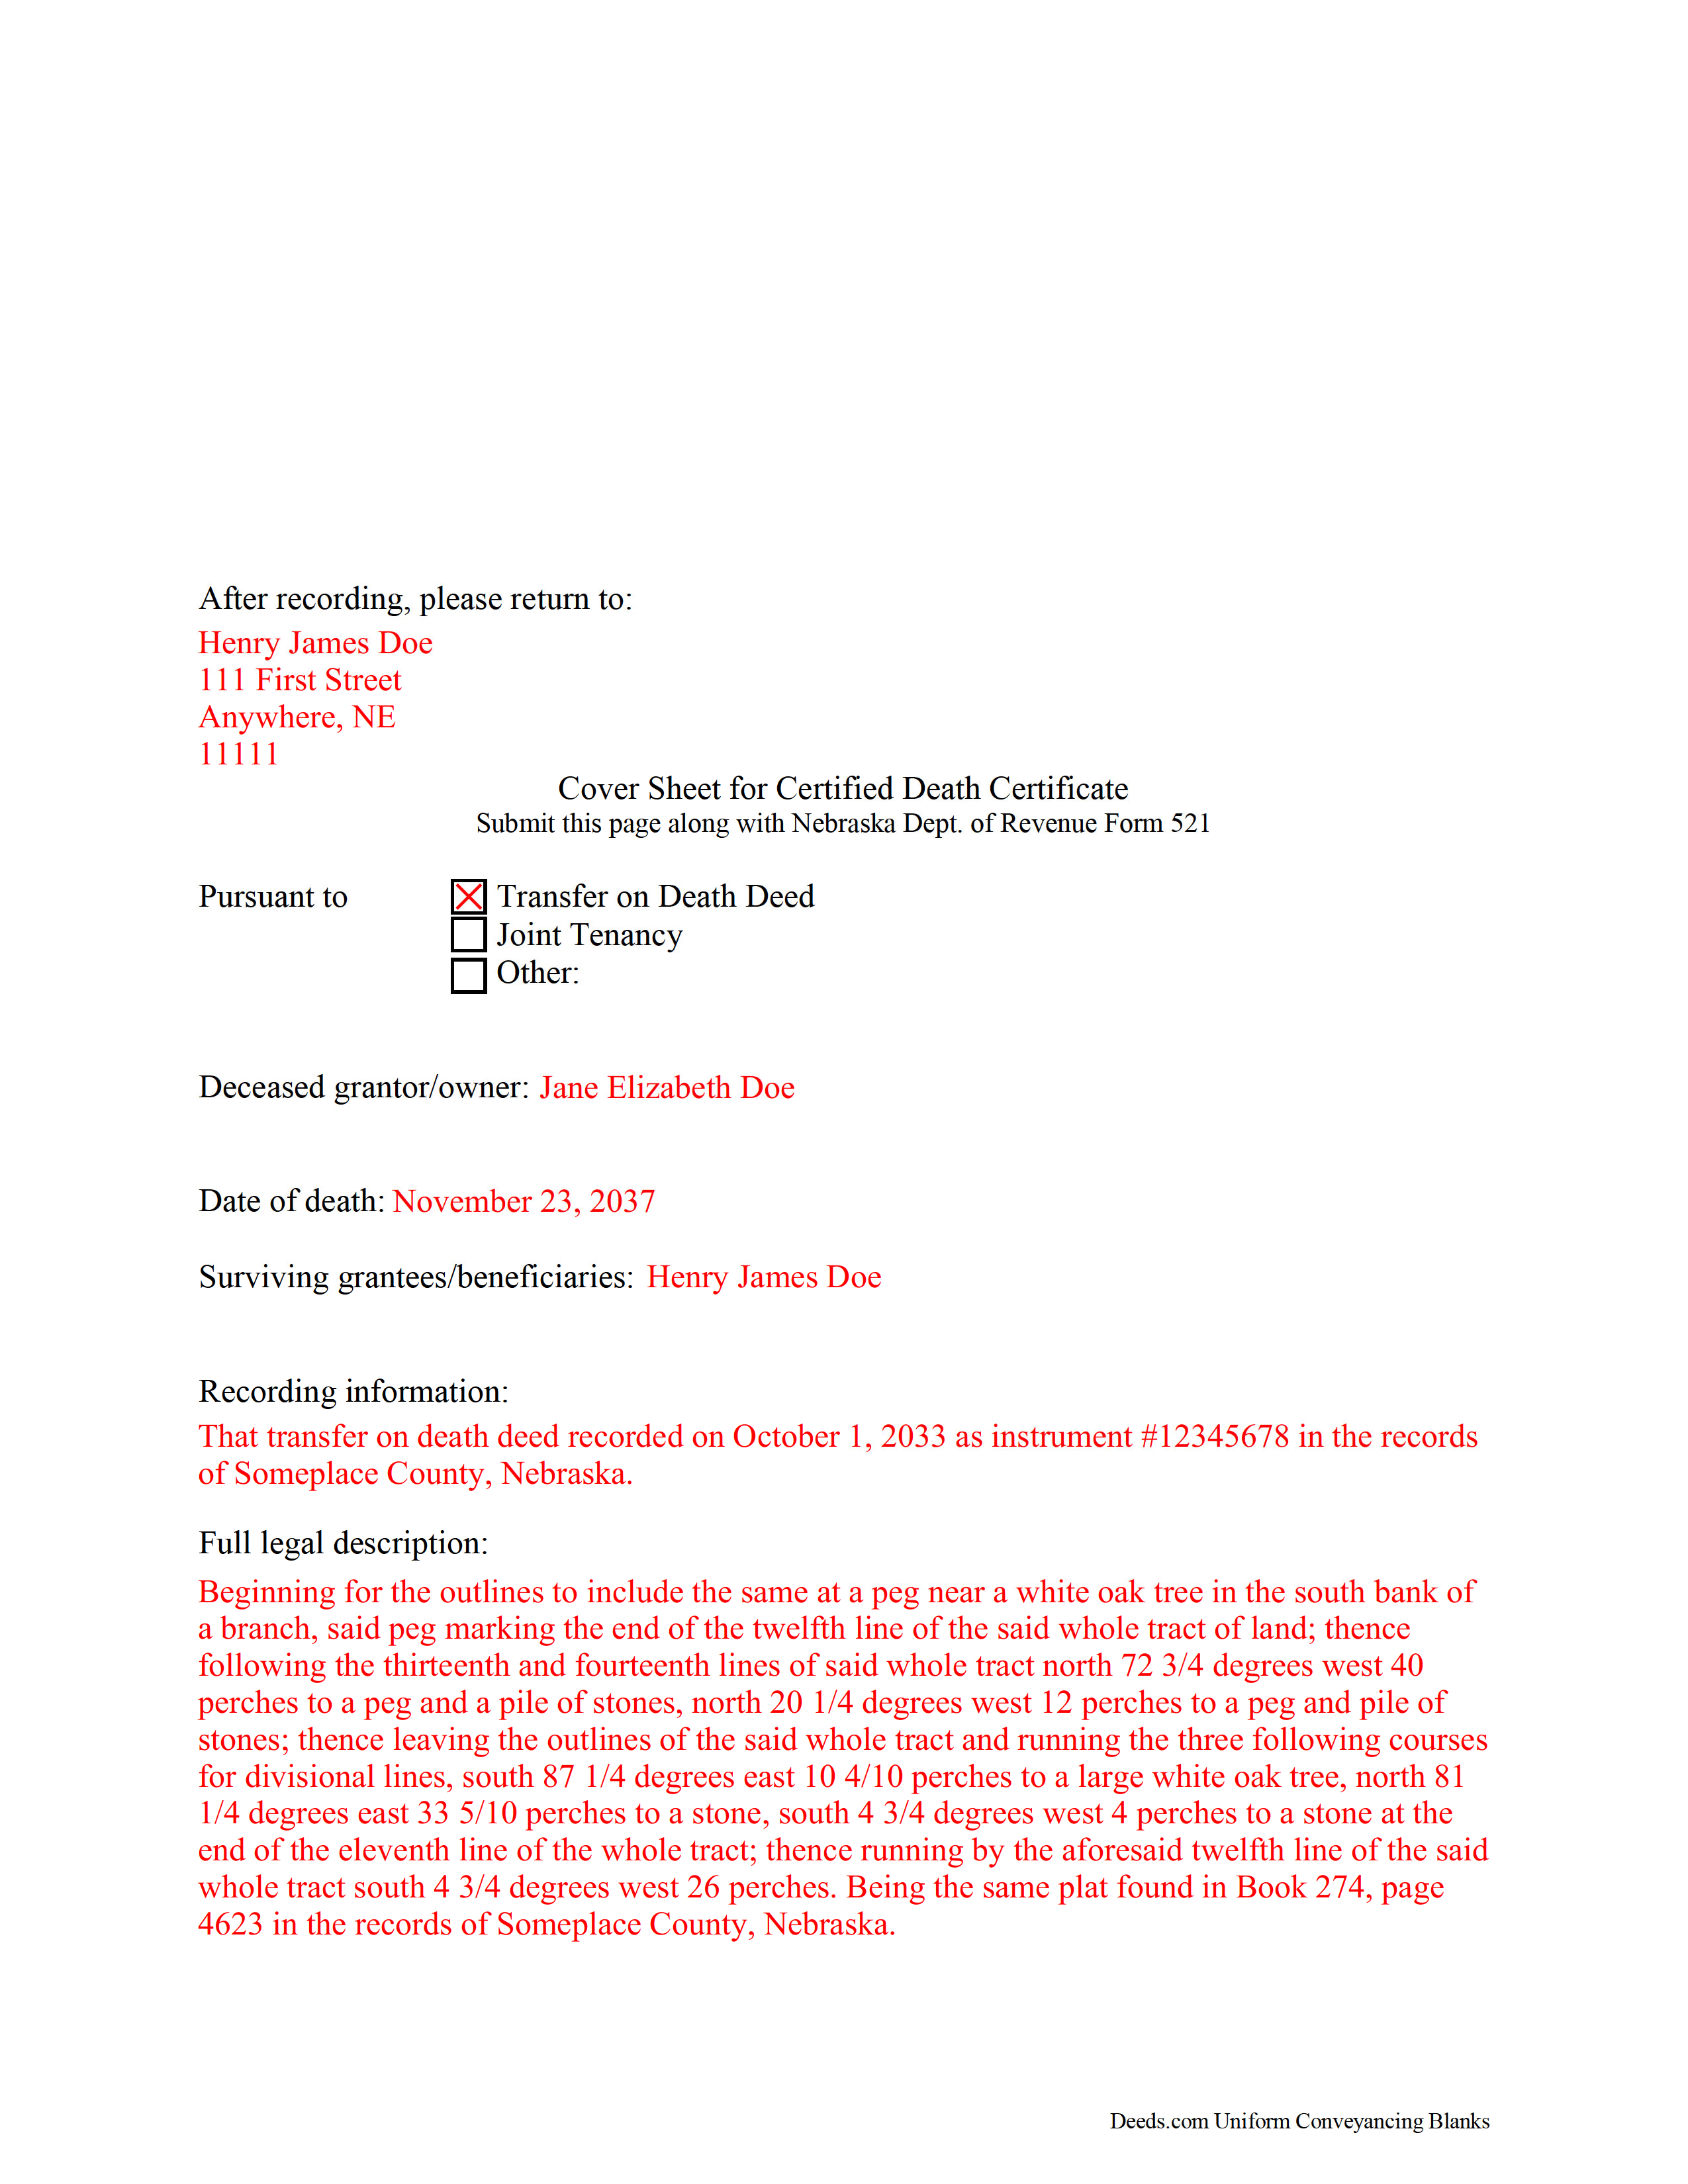 Completed Example of the Affidavit of Death Document